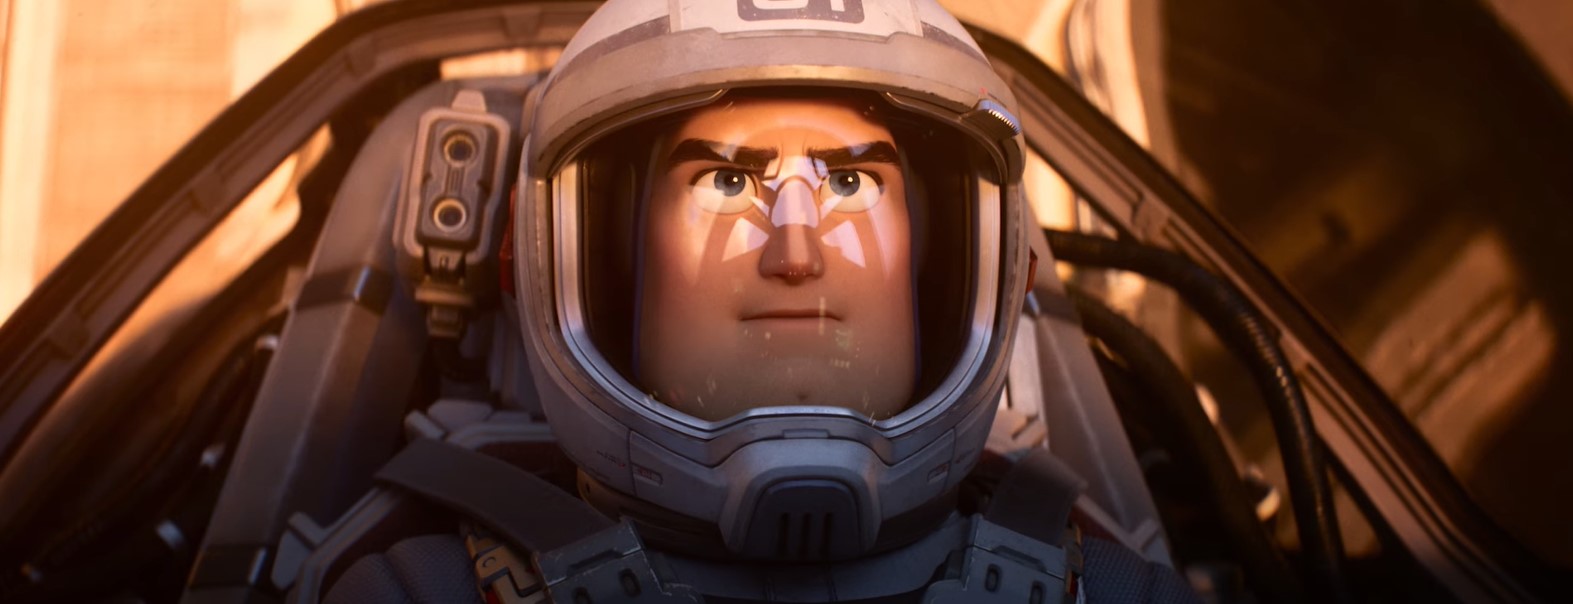 Pixar drops the first delightful trailer for Lightyear